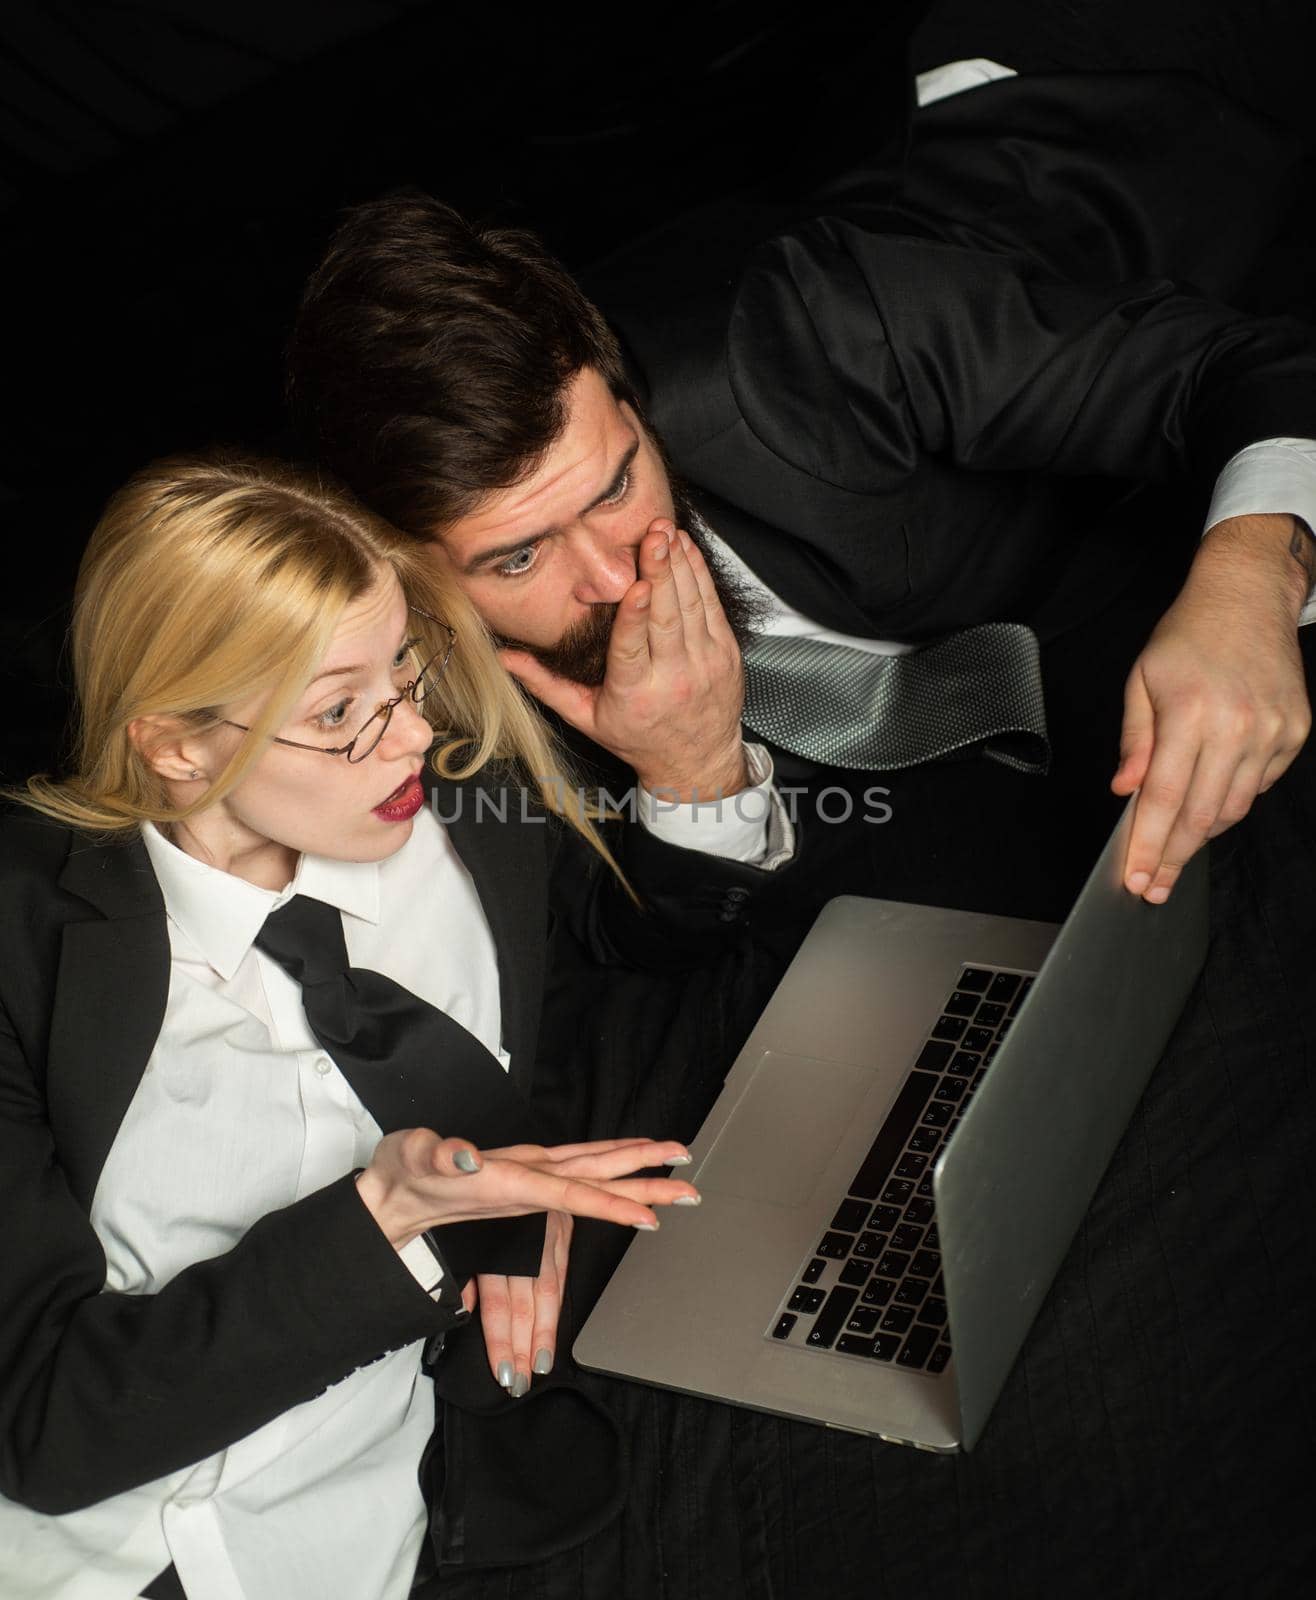 Two business partners working with laptop together.Beautiful young business woman and handsome businessman in formal suits are using a laptop